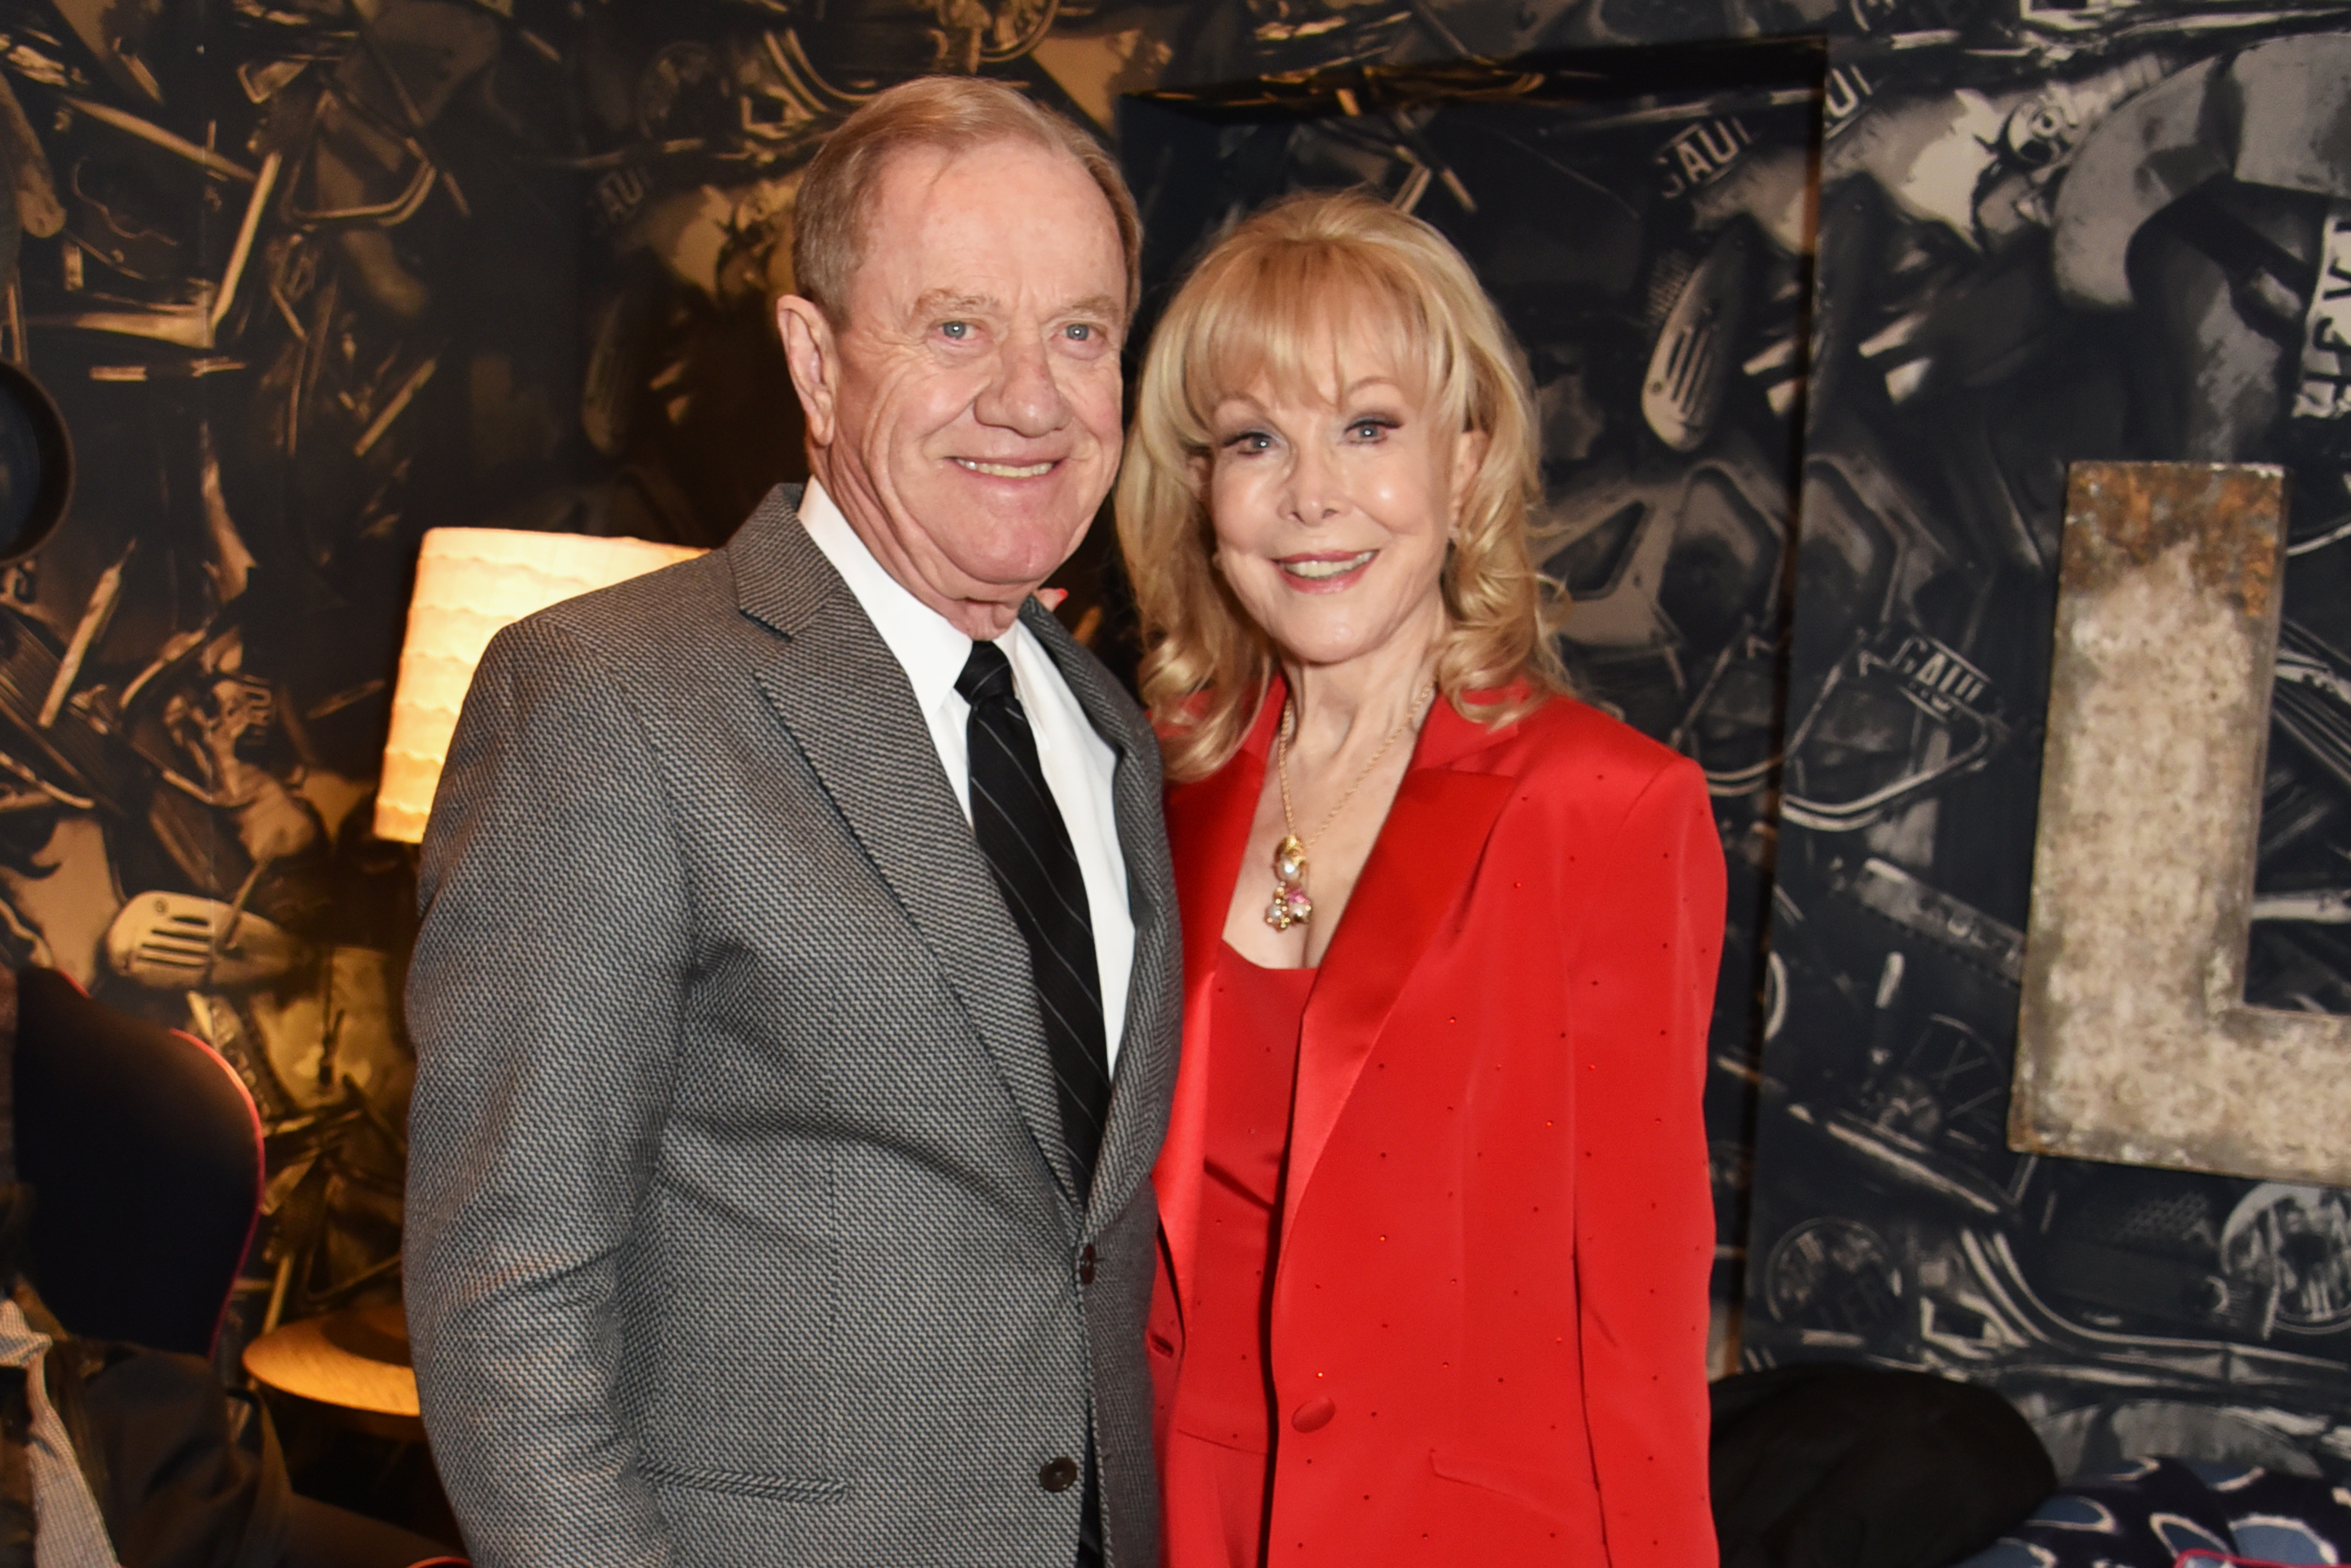 Barbara Eden and John Eicholtz attend the press night after party for "Ruthless! The Musical" on March 27, 2018 in London, England | Source: Getty Images